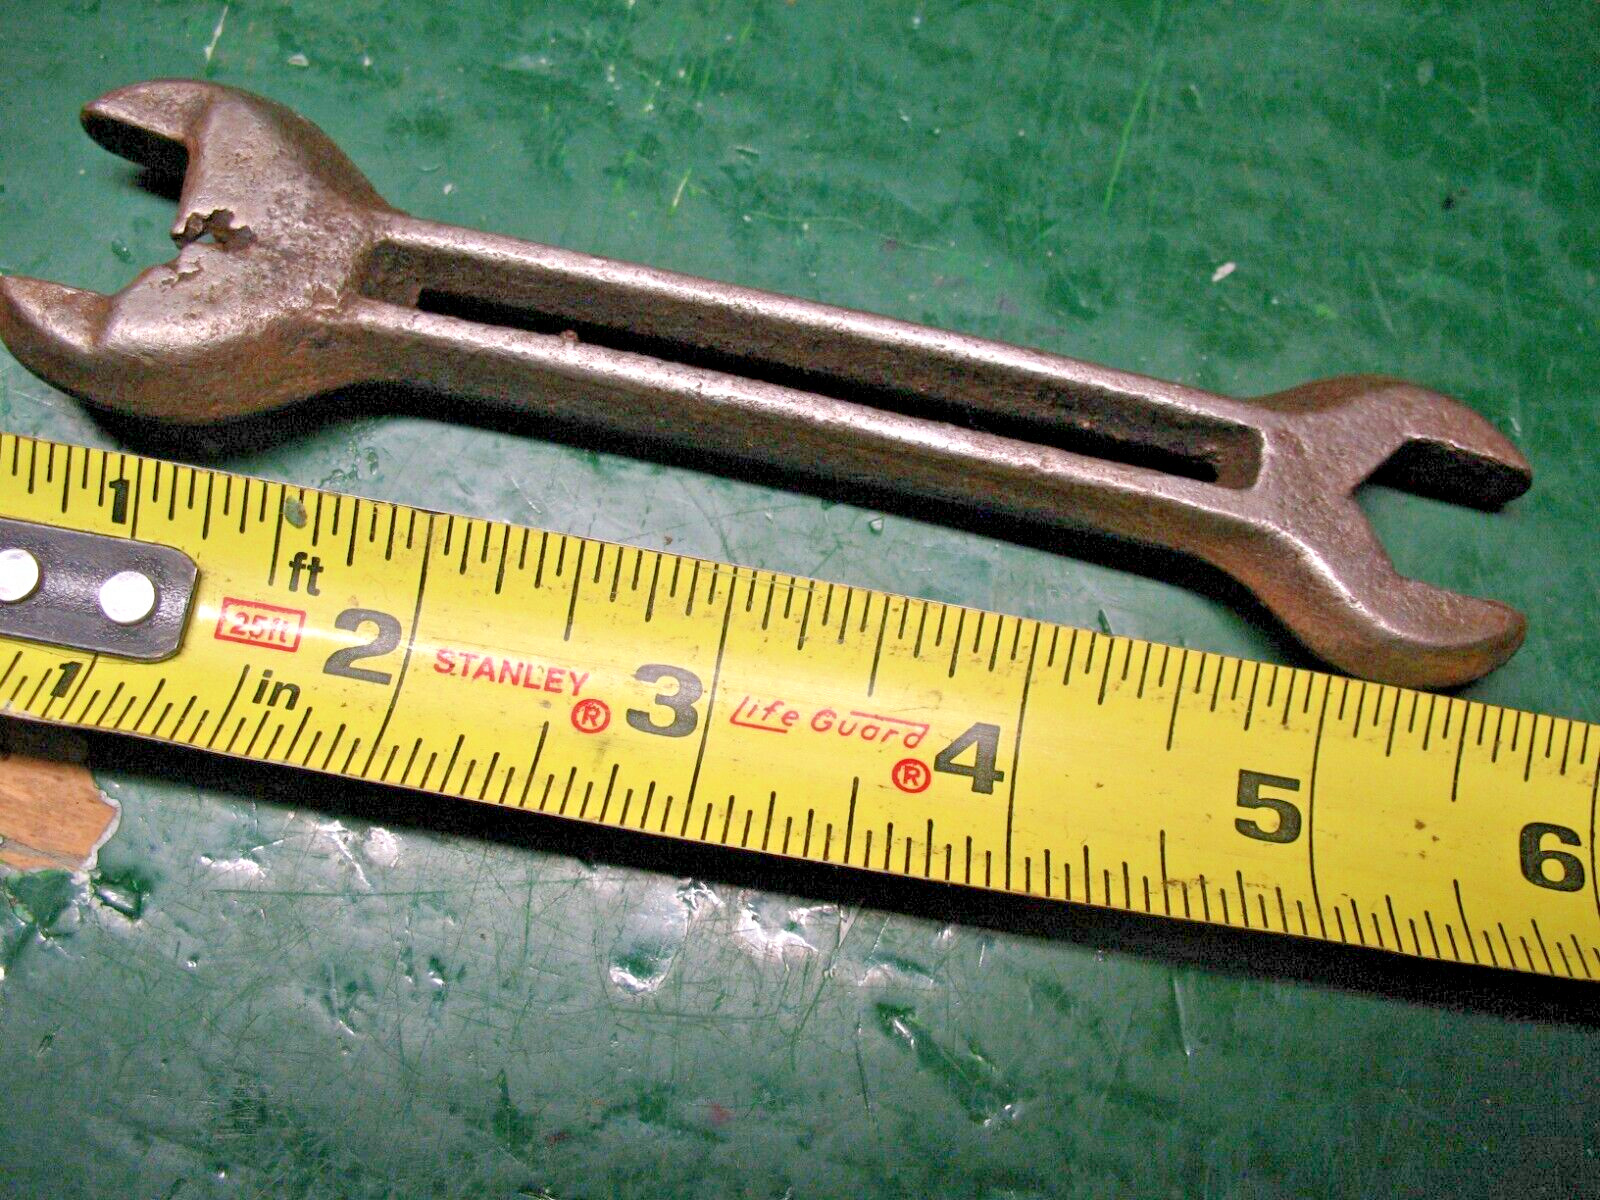 ANTIQUE  IRON   OPEN END WRENCH  THICK  MASSIVE  HEAVY  UNMARKED    ORIG. USA